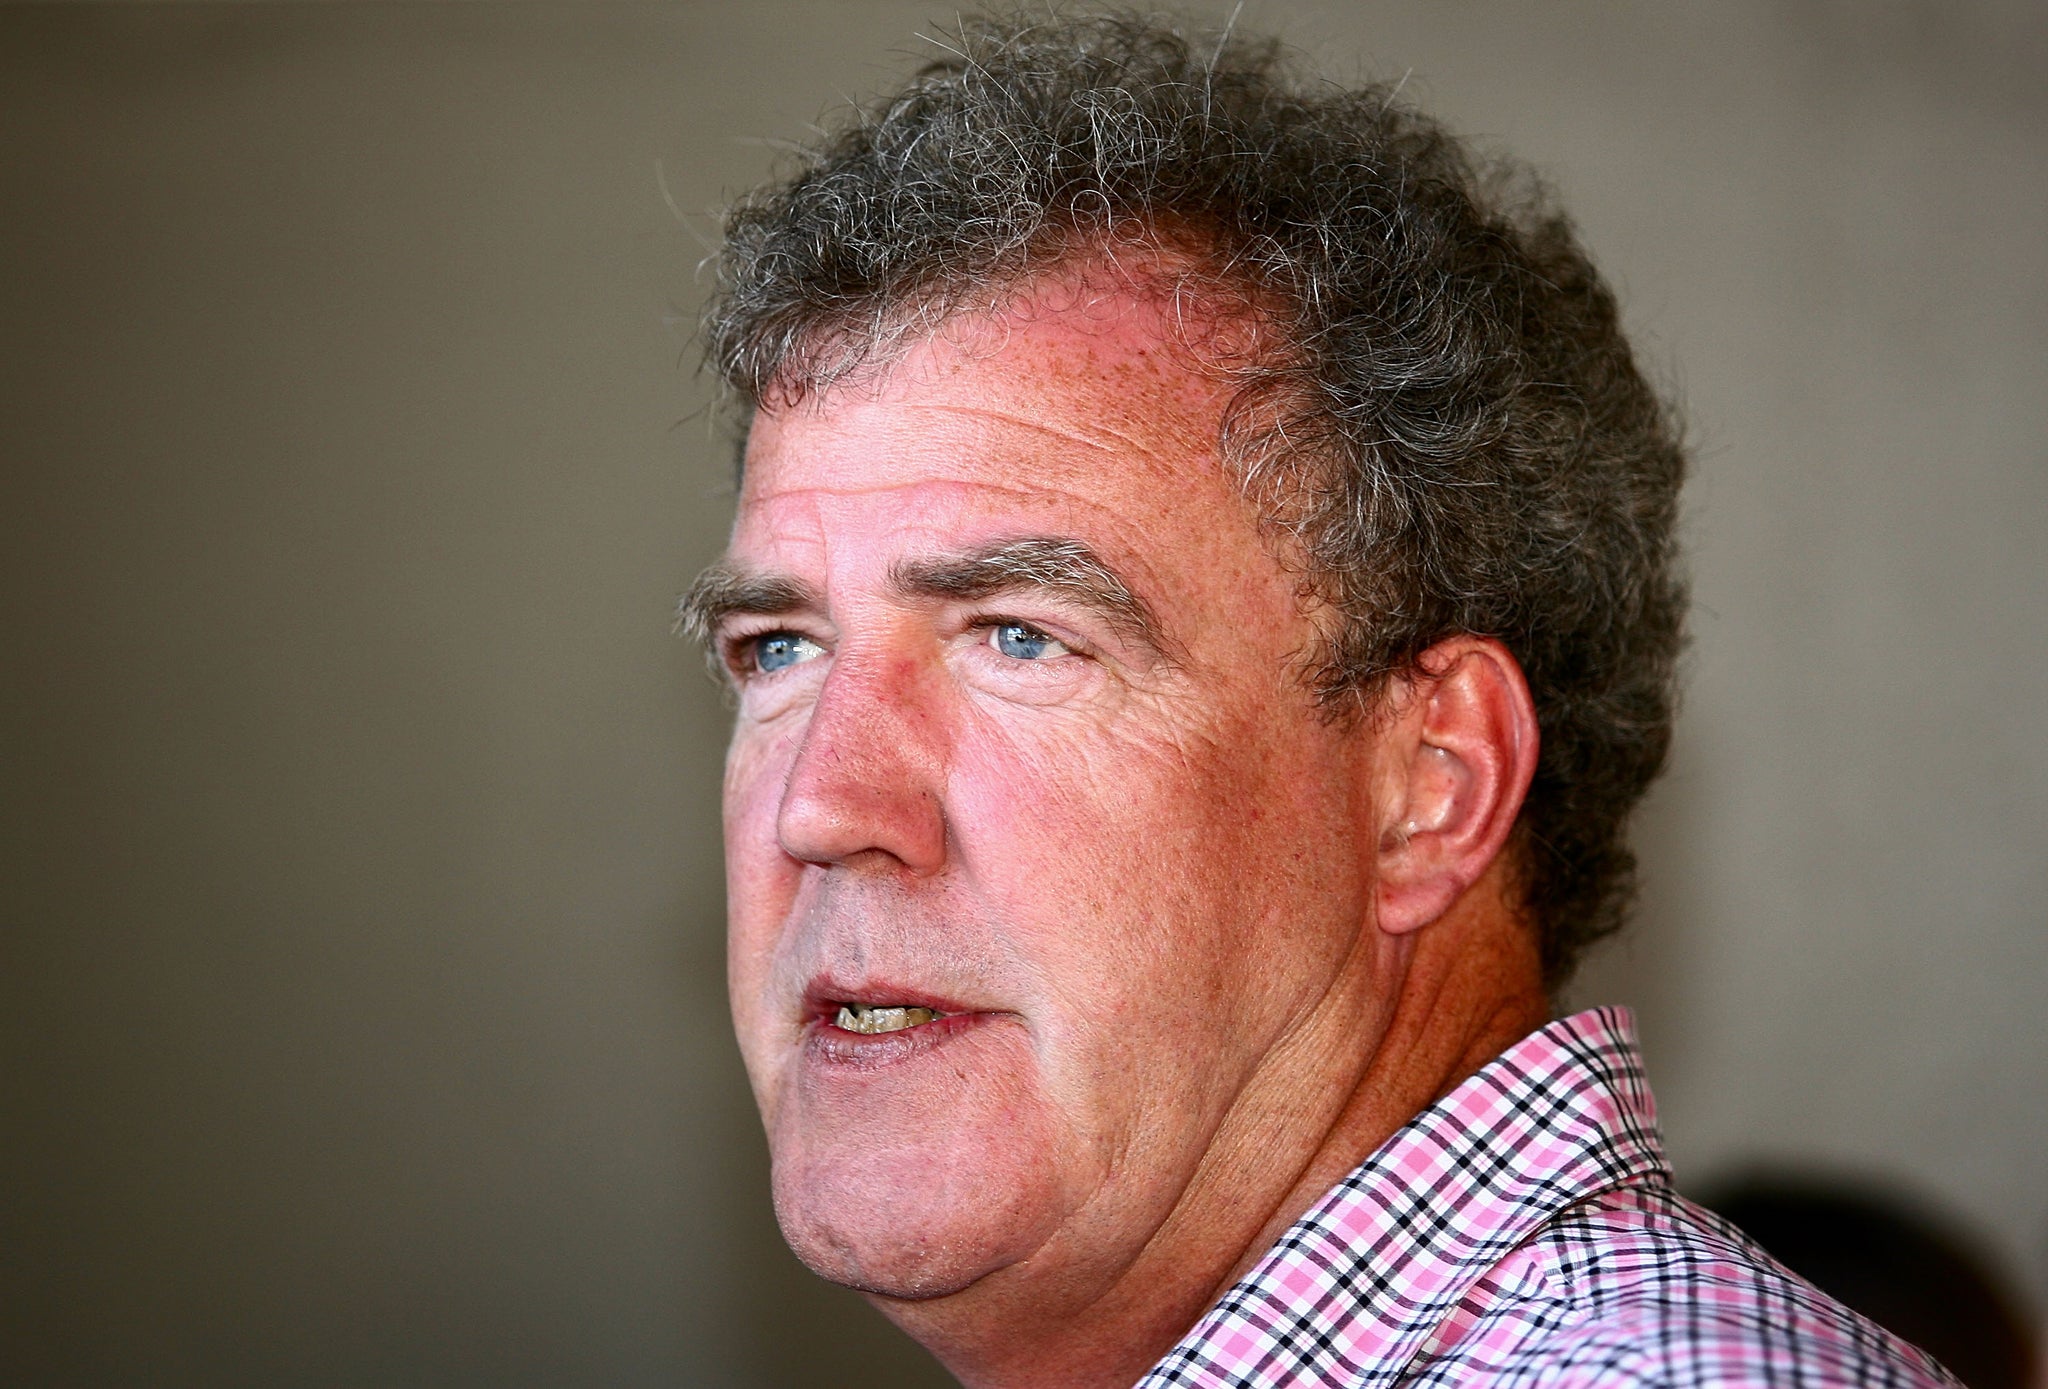 Jeremy Clarkson's comments towards transgender people stir controversy